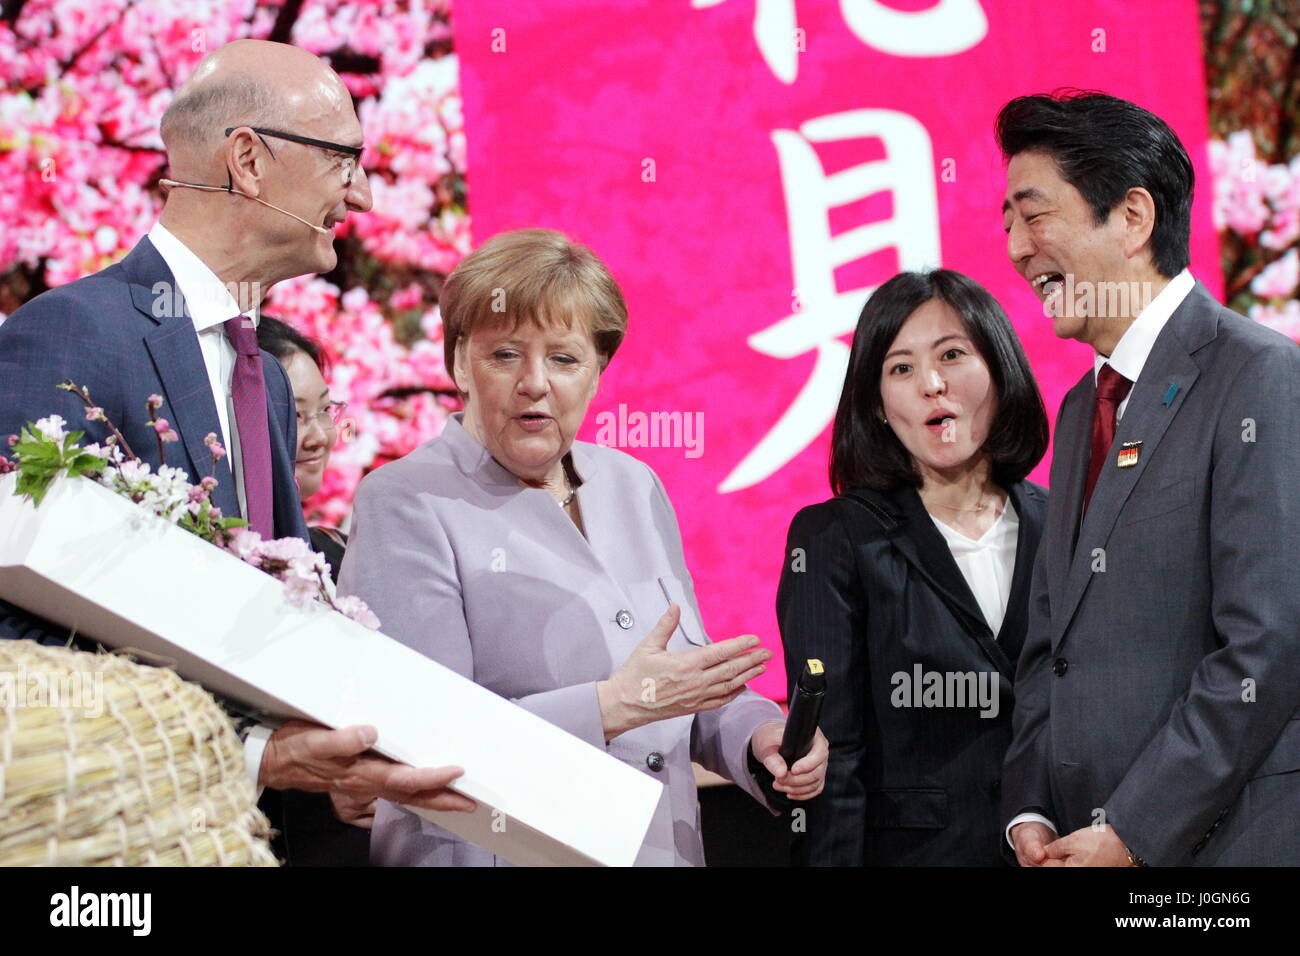 Hanover, Germany. 20th March, 2017. Timotheus Höttges (left), CEO Deutsche Telekom AG, meets Angela Merkel, Federal Cancellor of Germany, and Shinzo Abe, Prime Minister of Japan, at Telekom's exhibition stand, CeBIT-opening walk, CeBIT 2017, ICT trade fair, lead theme 'd!conomy - no limits'. Photocredit: Christian Lademann Stock Photo